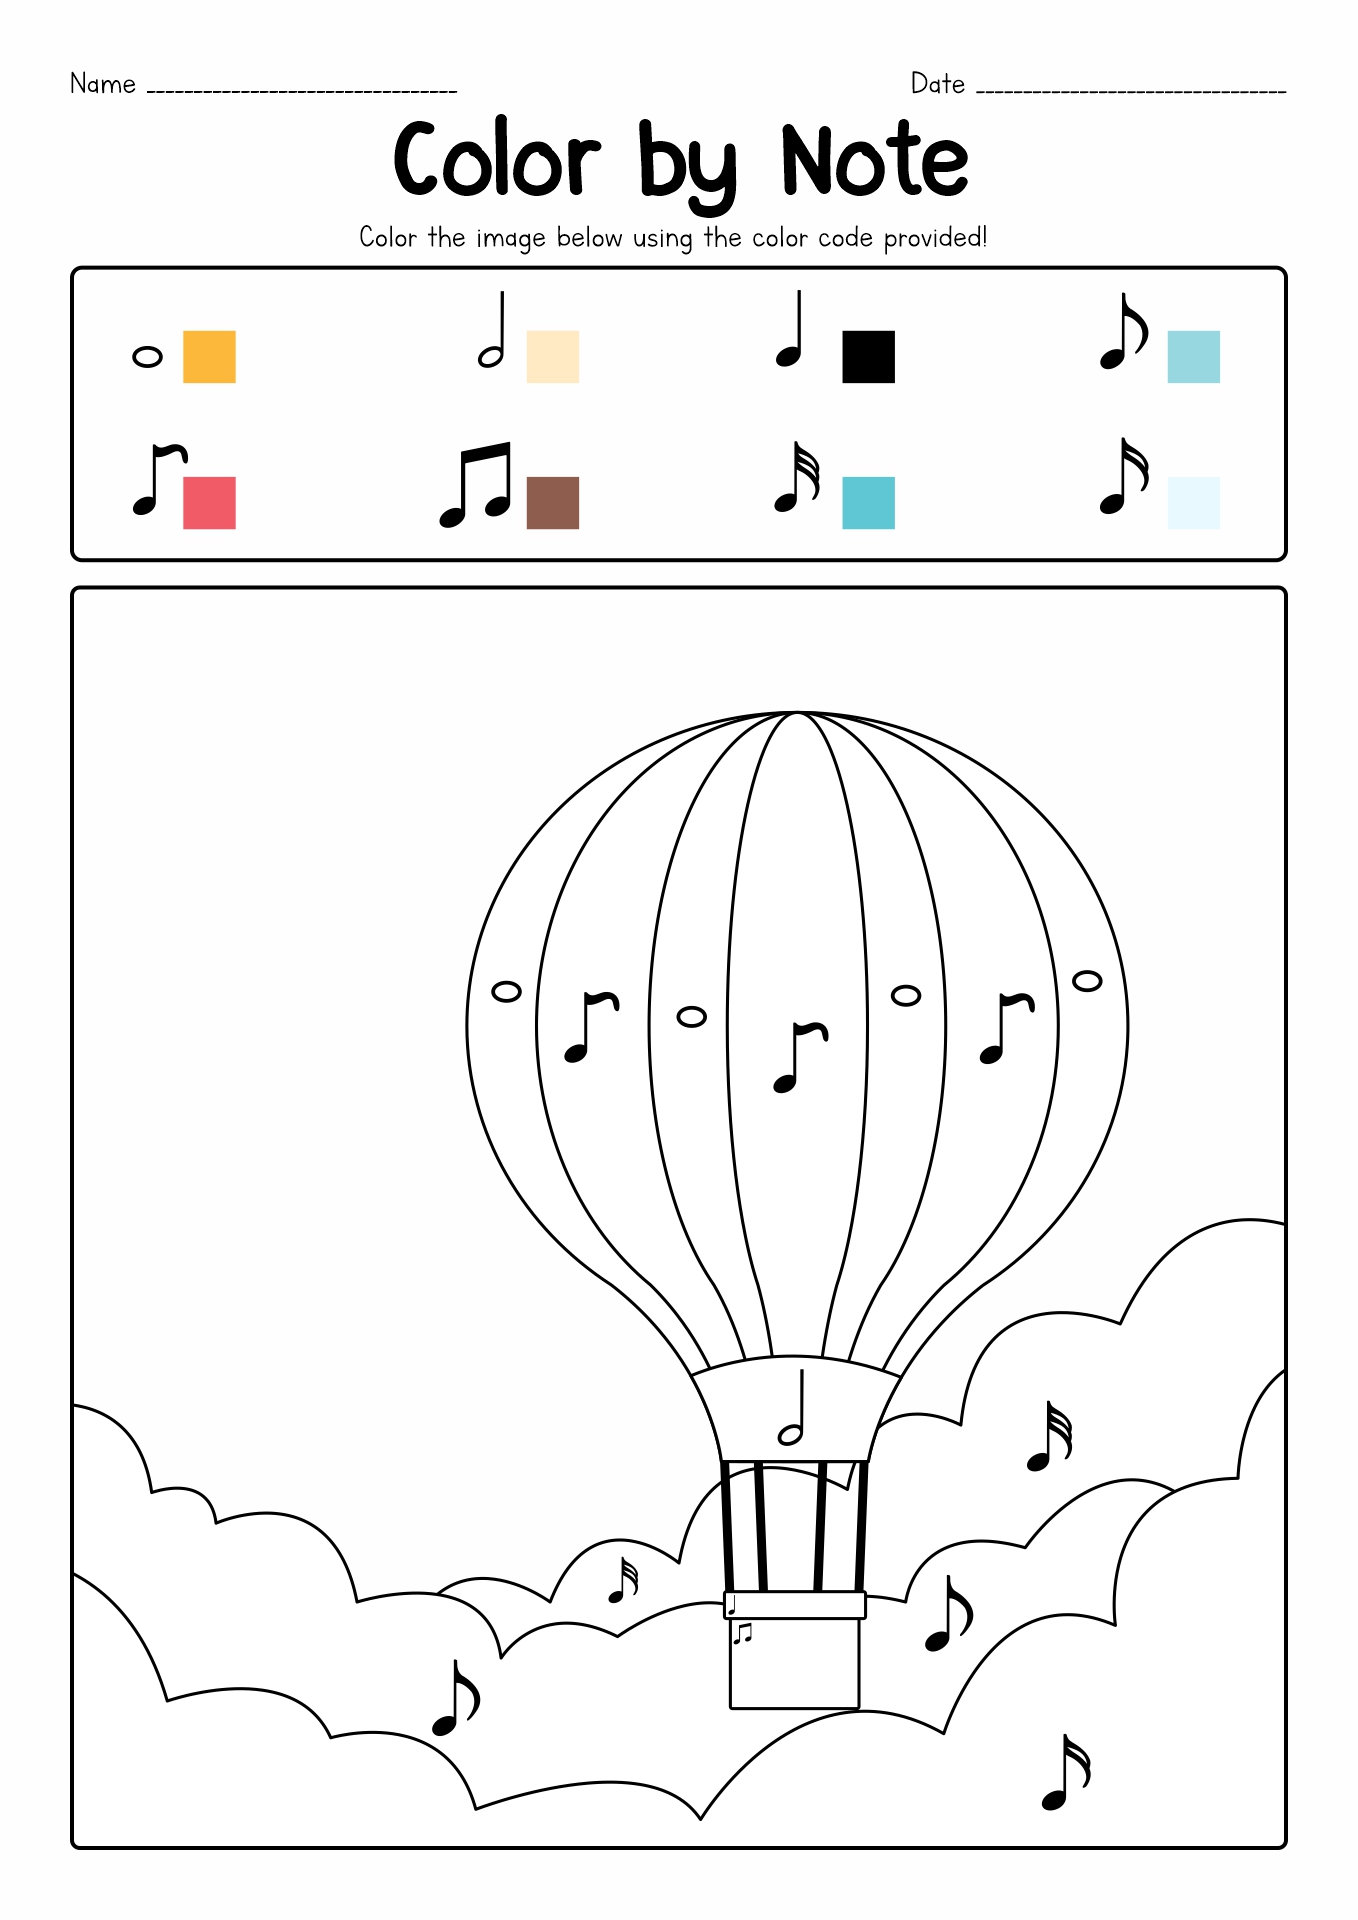 Quarter Music Notes to Color Image